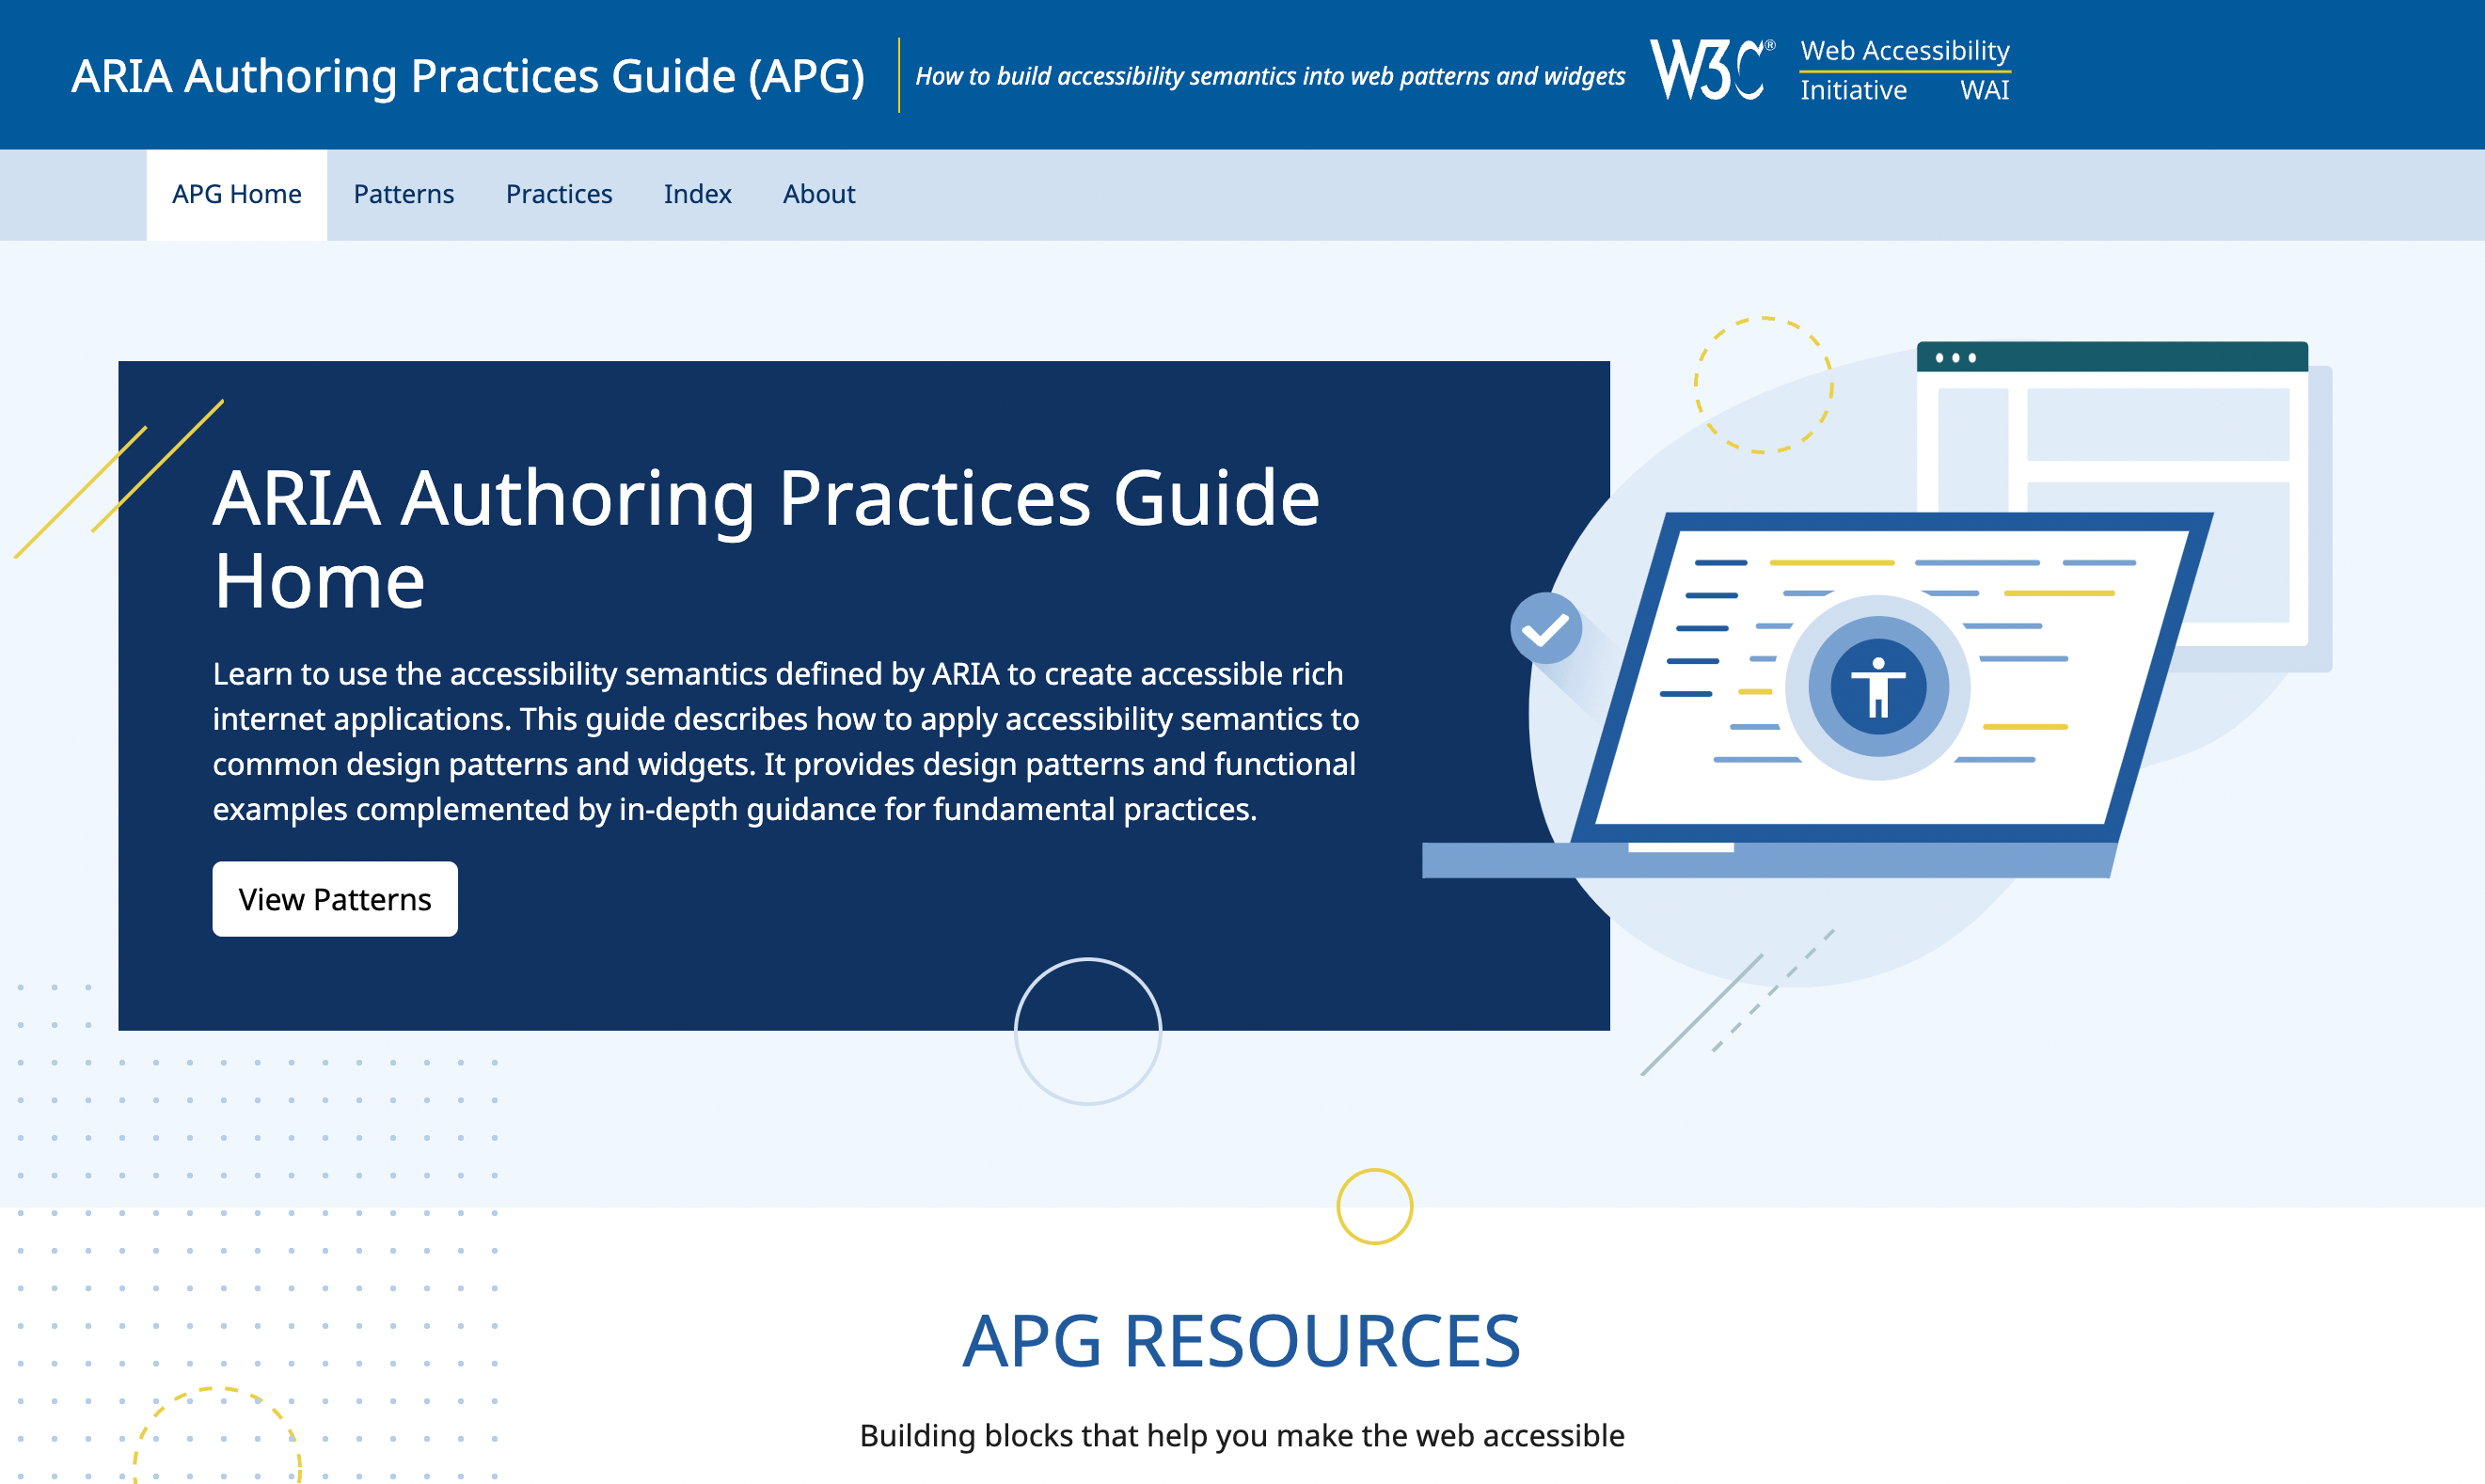 A screenshot of the APG home page